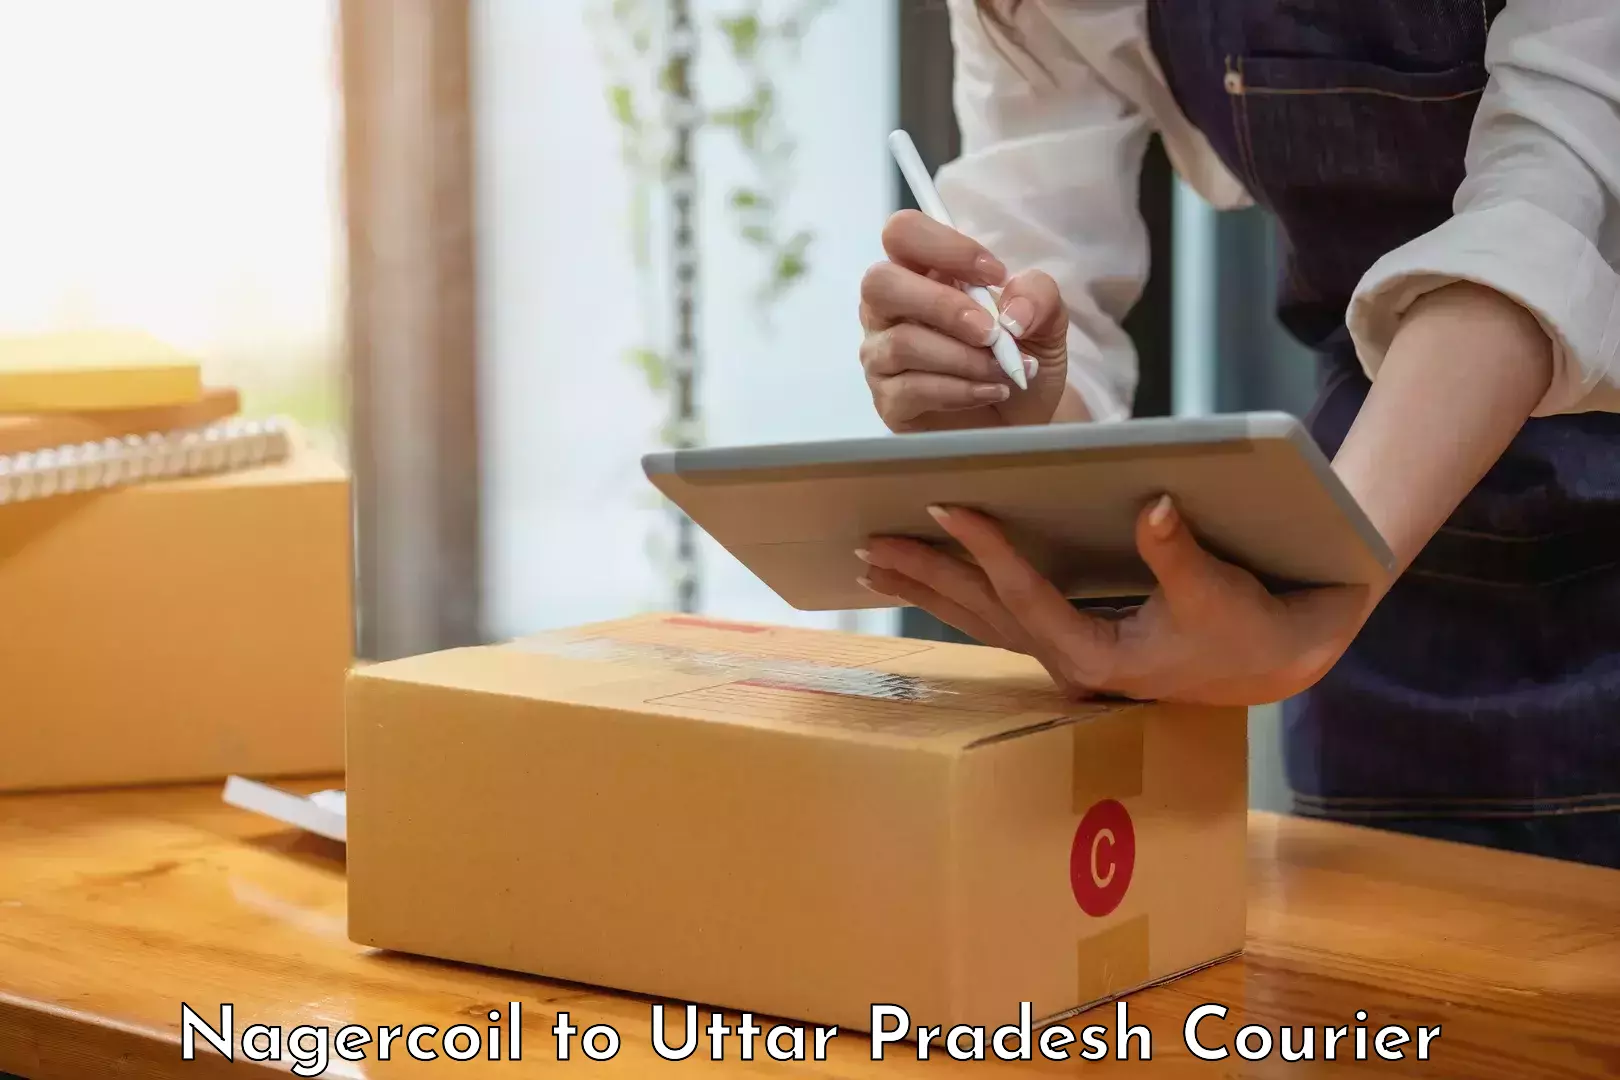 User-friendly courier app Nagercoil to Unchahar